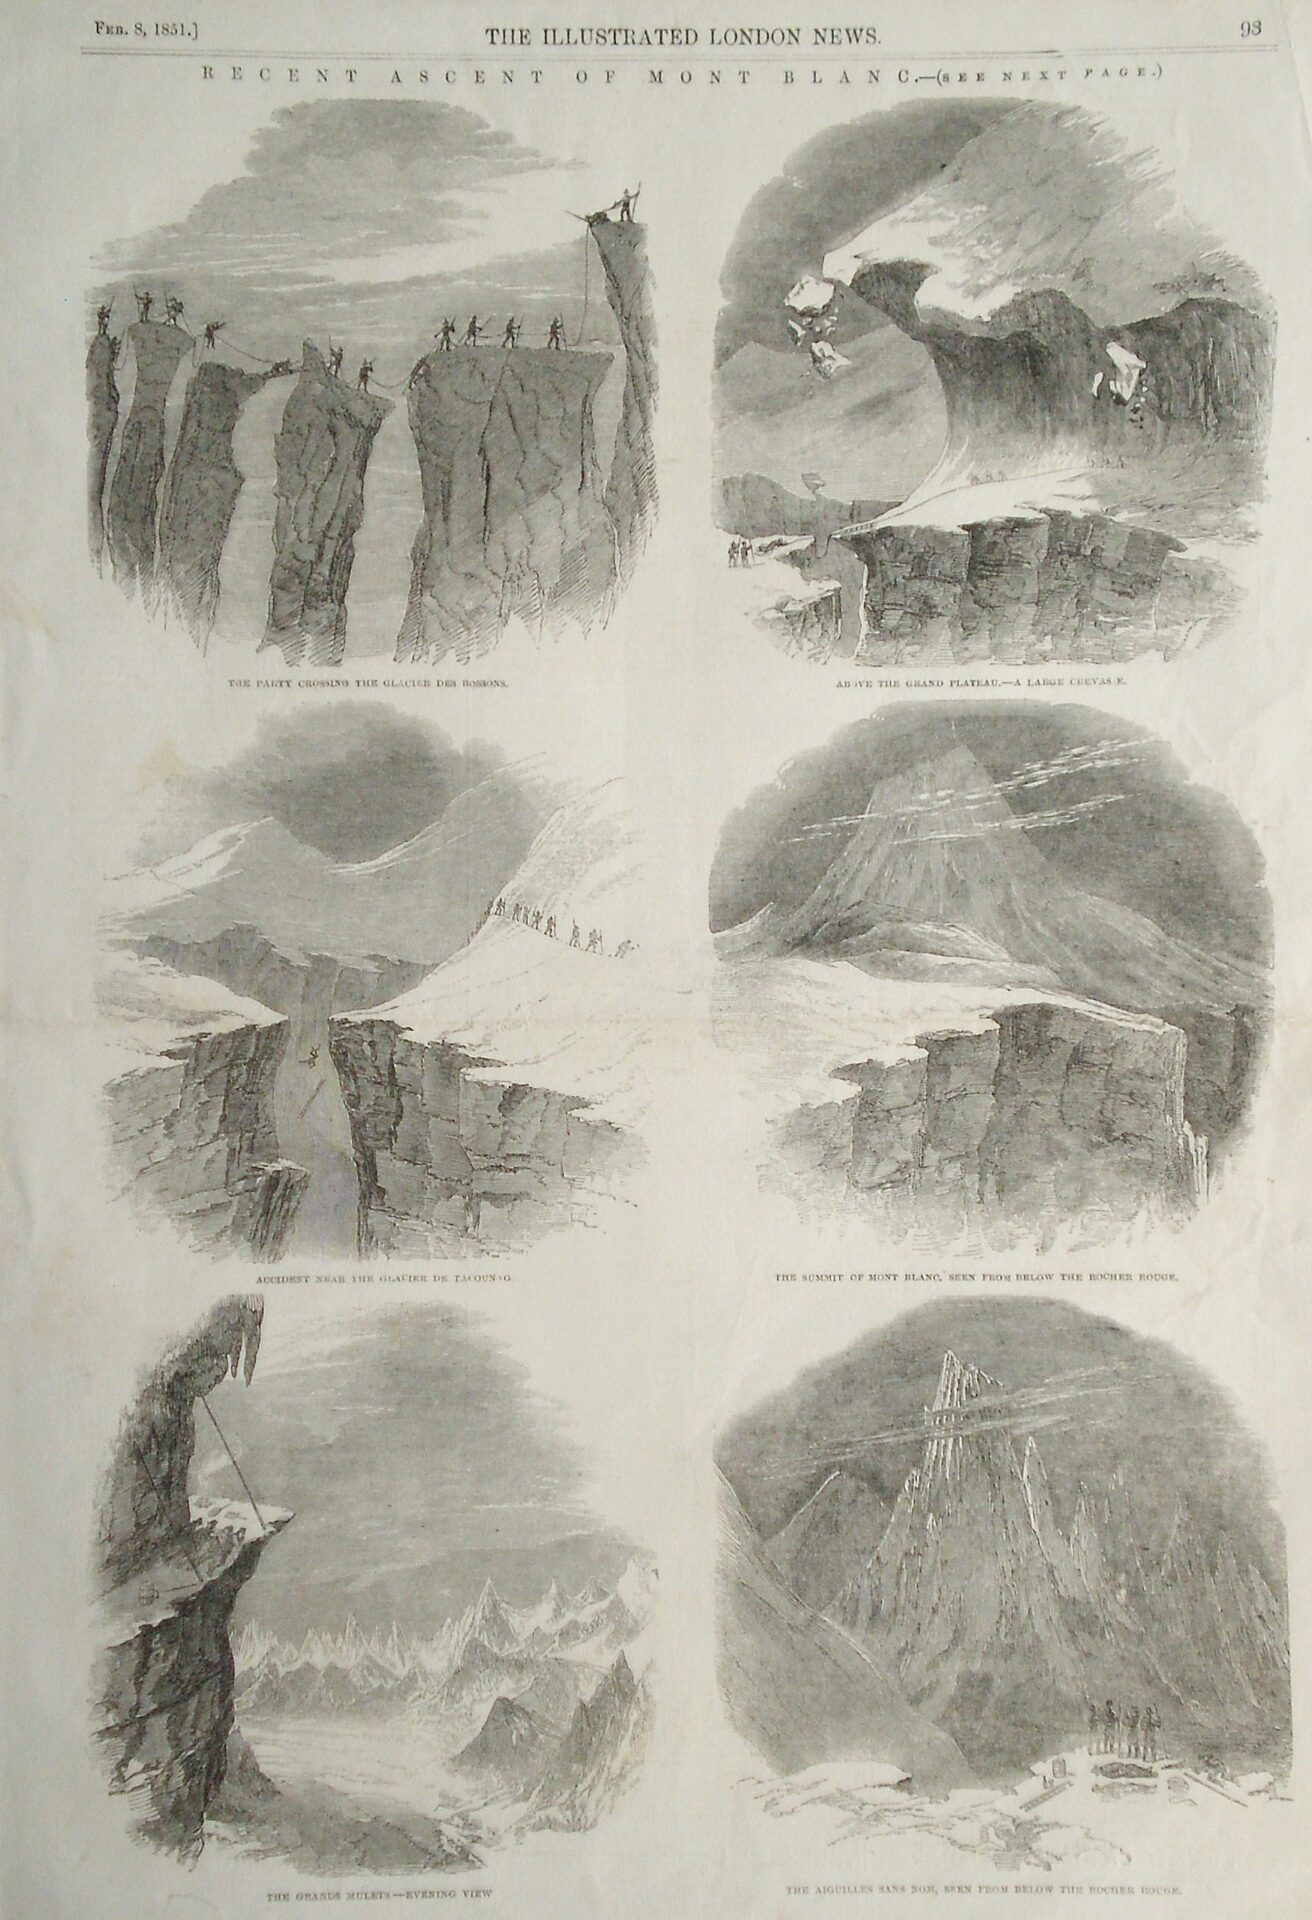 Article on an 1850 ascent of Mont Blanc by Mr Erasmus Galton